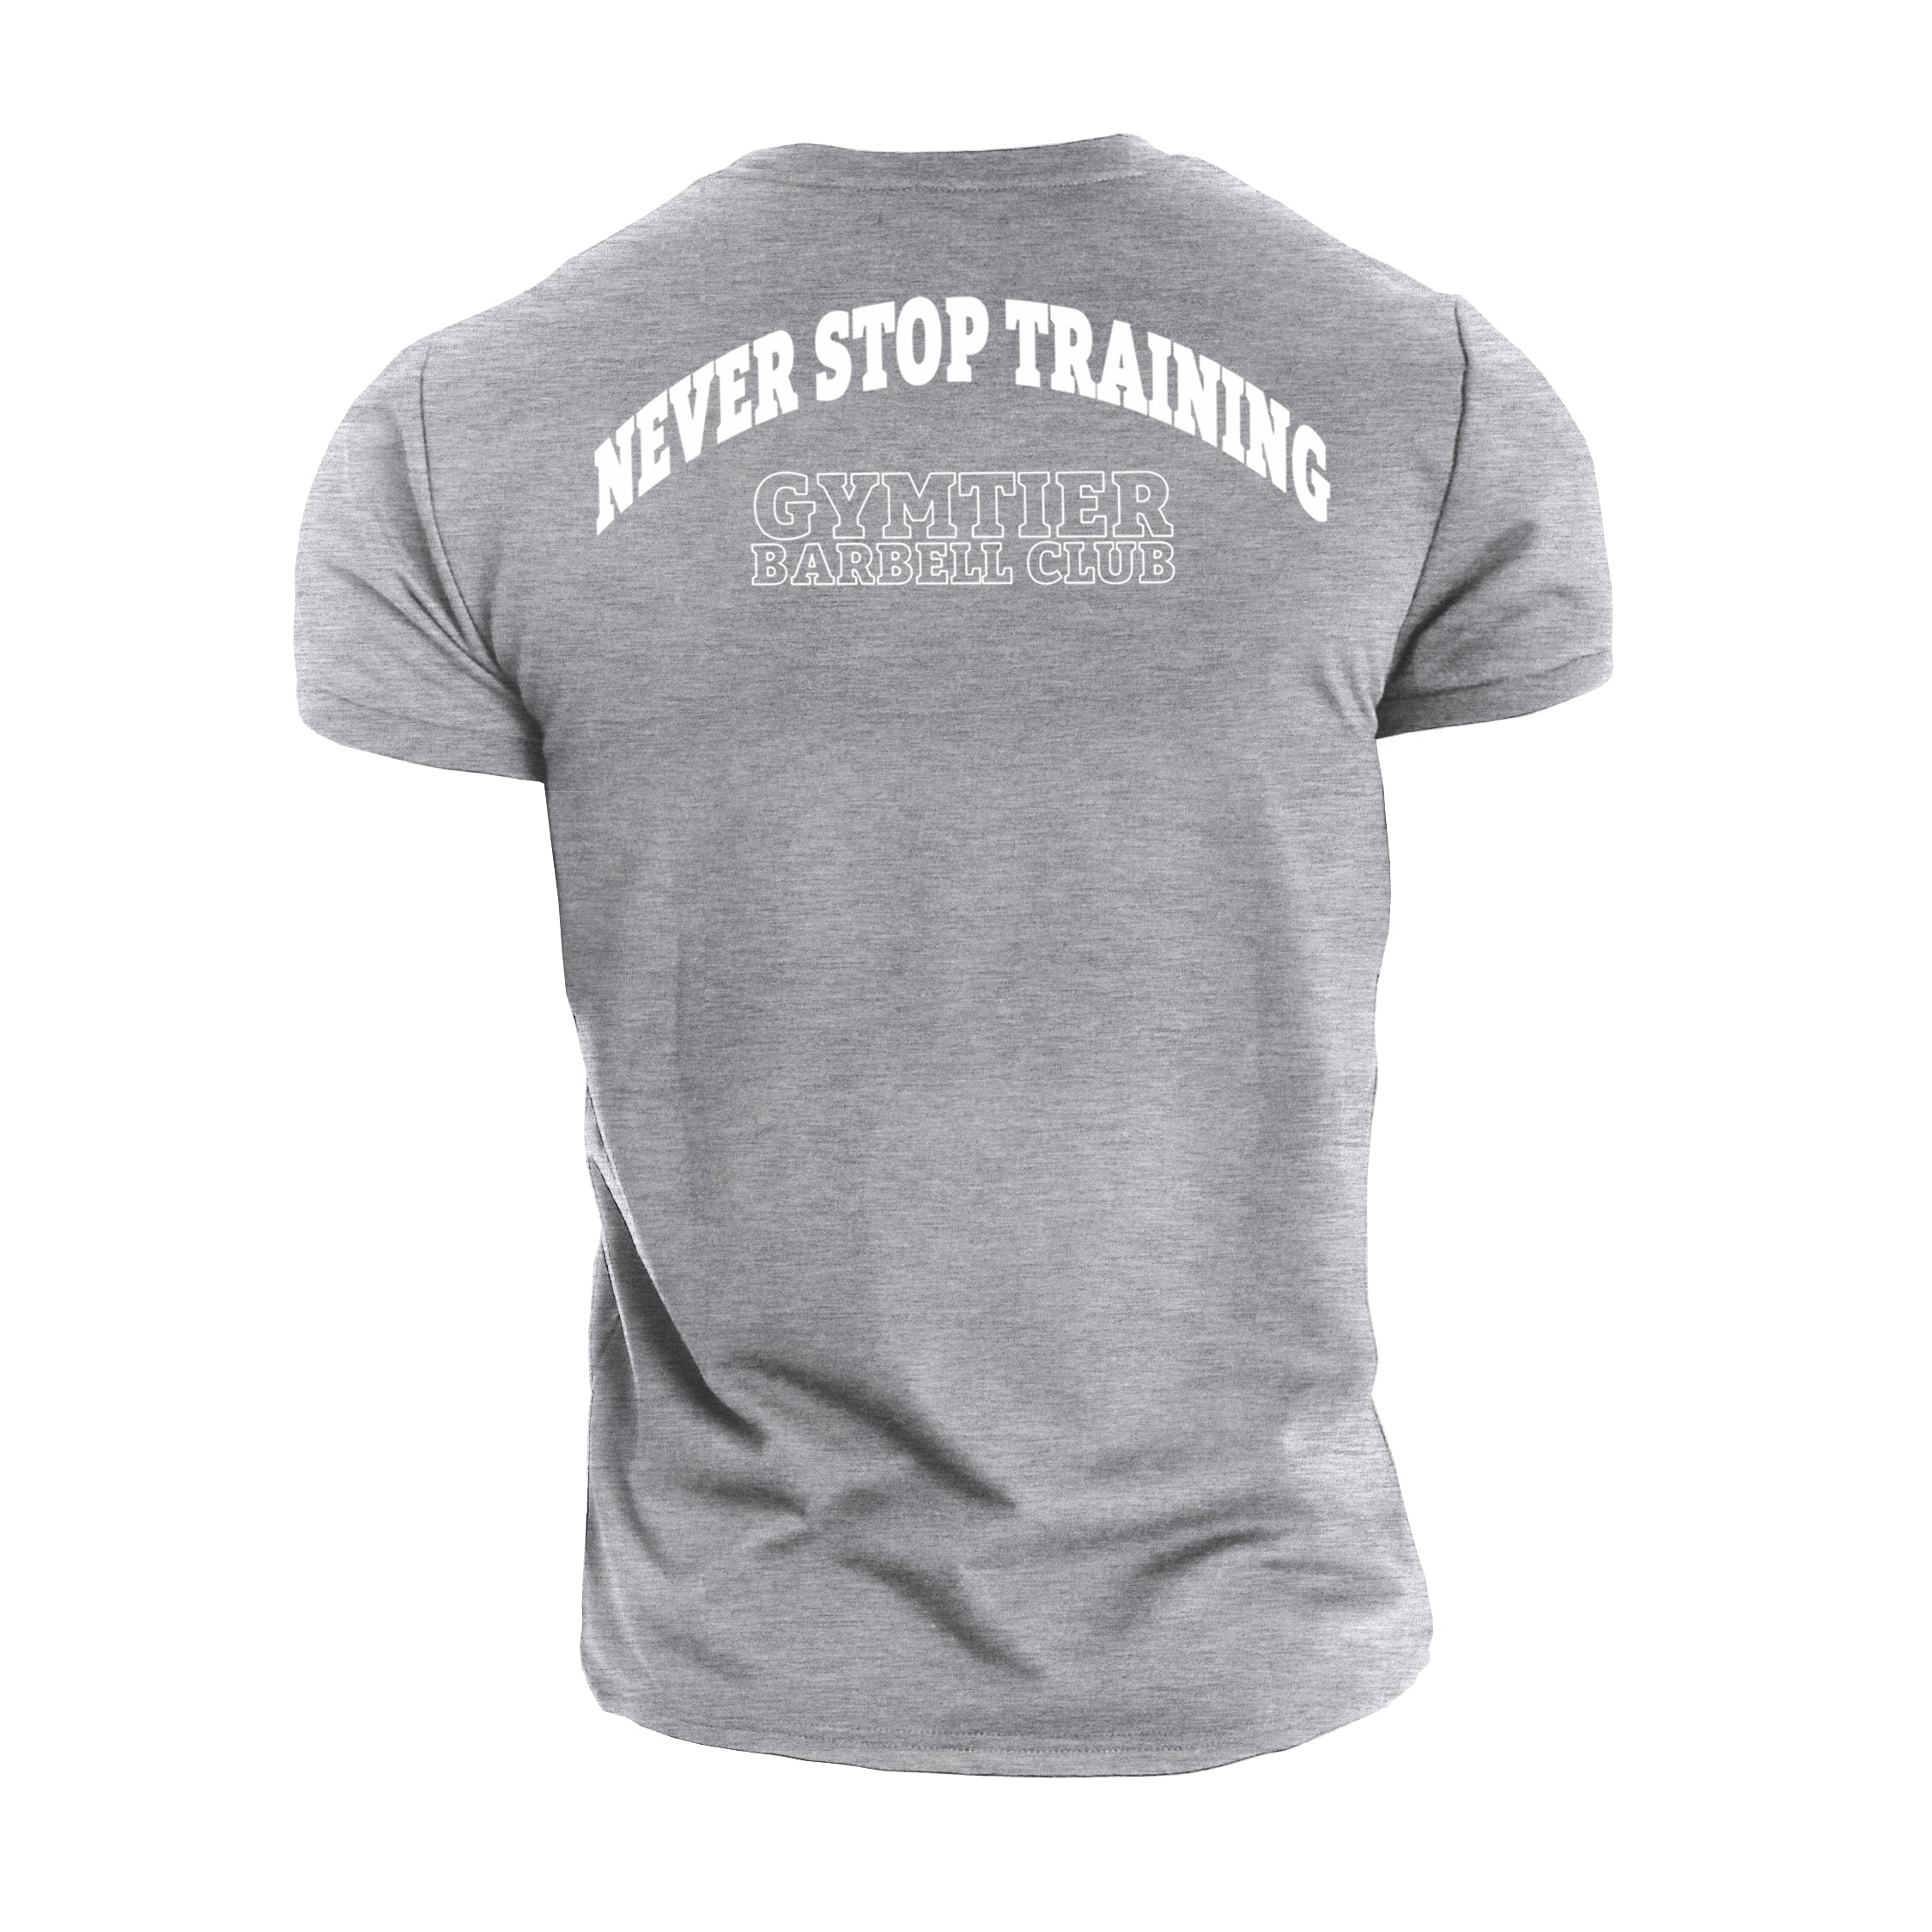 Gymtier Barbell Club - Never Stop Training - Gym T-Shirt